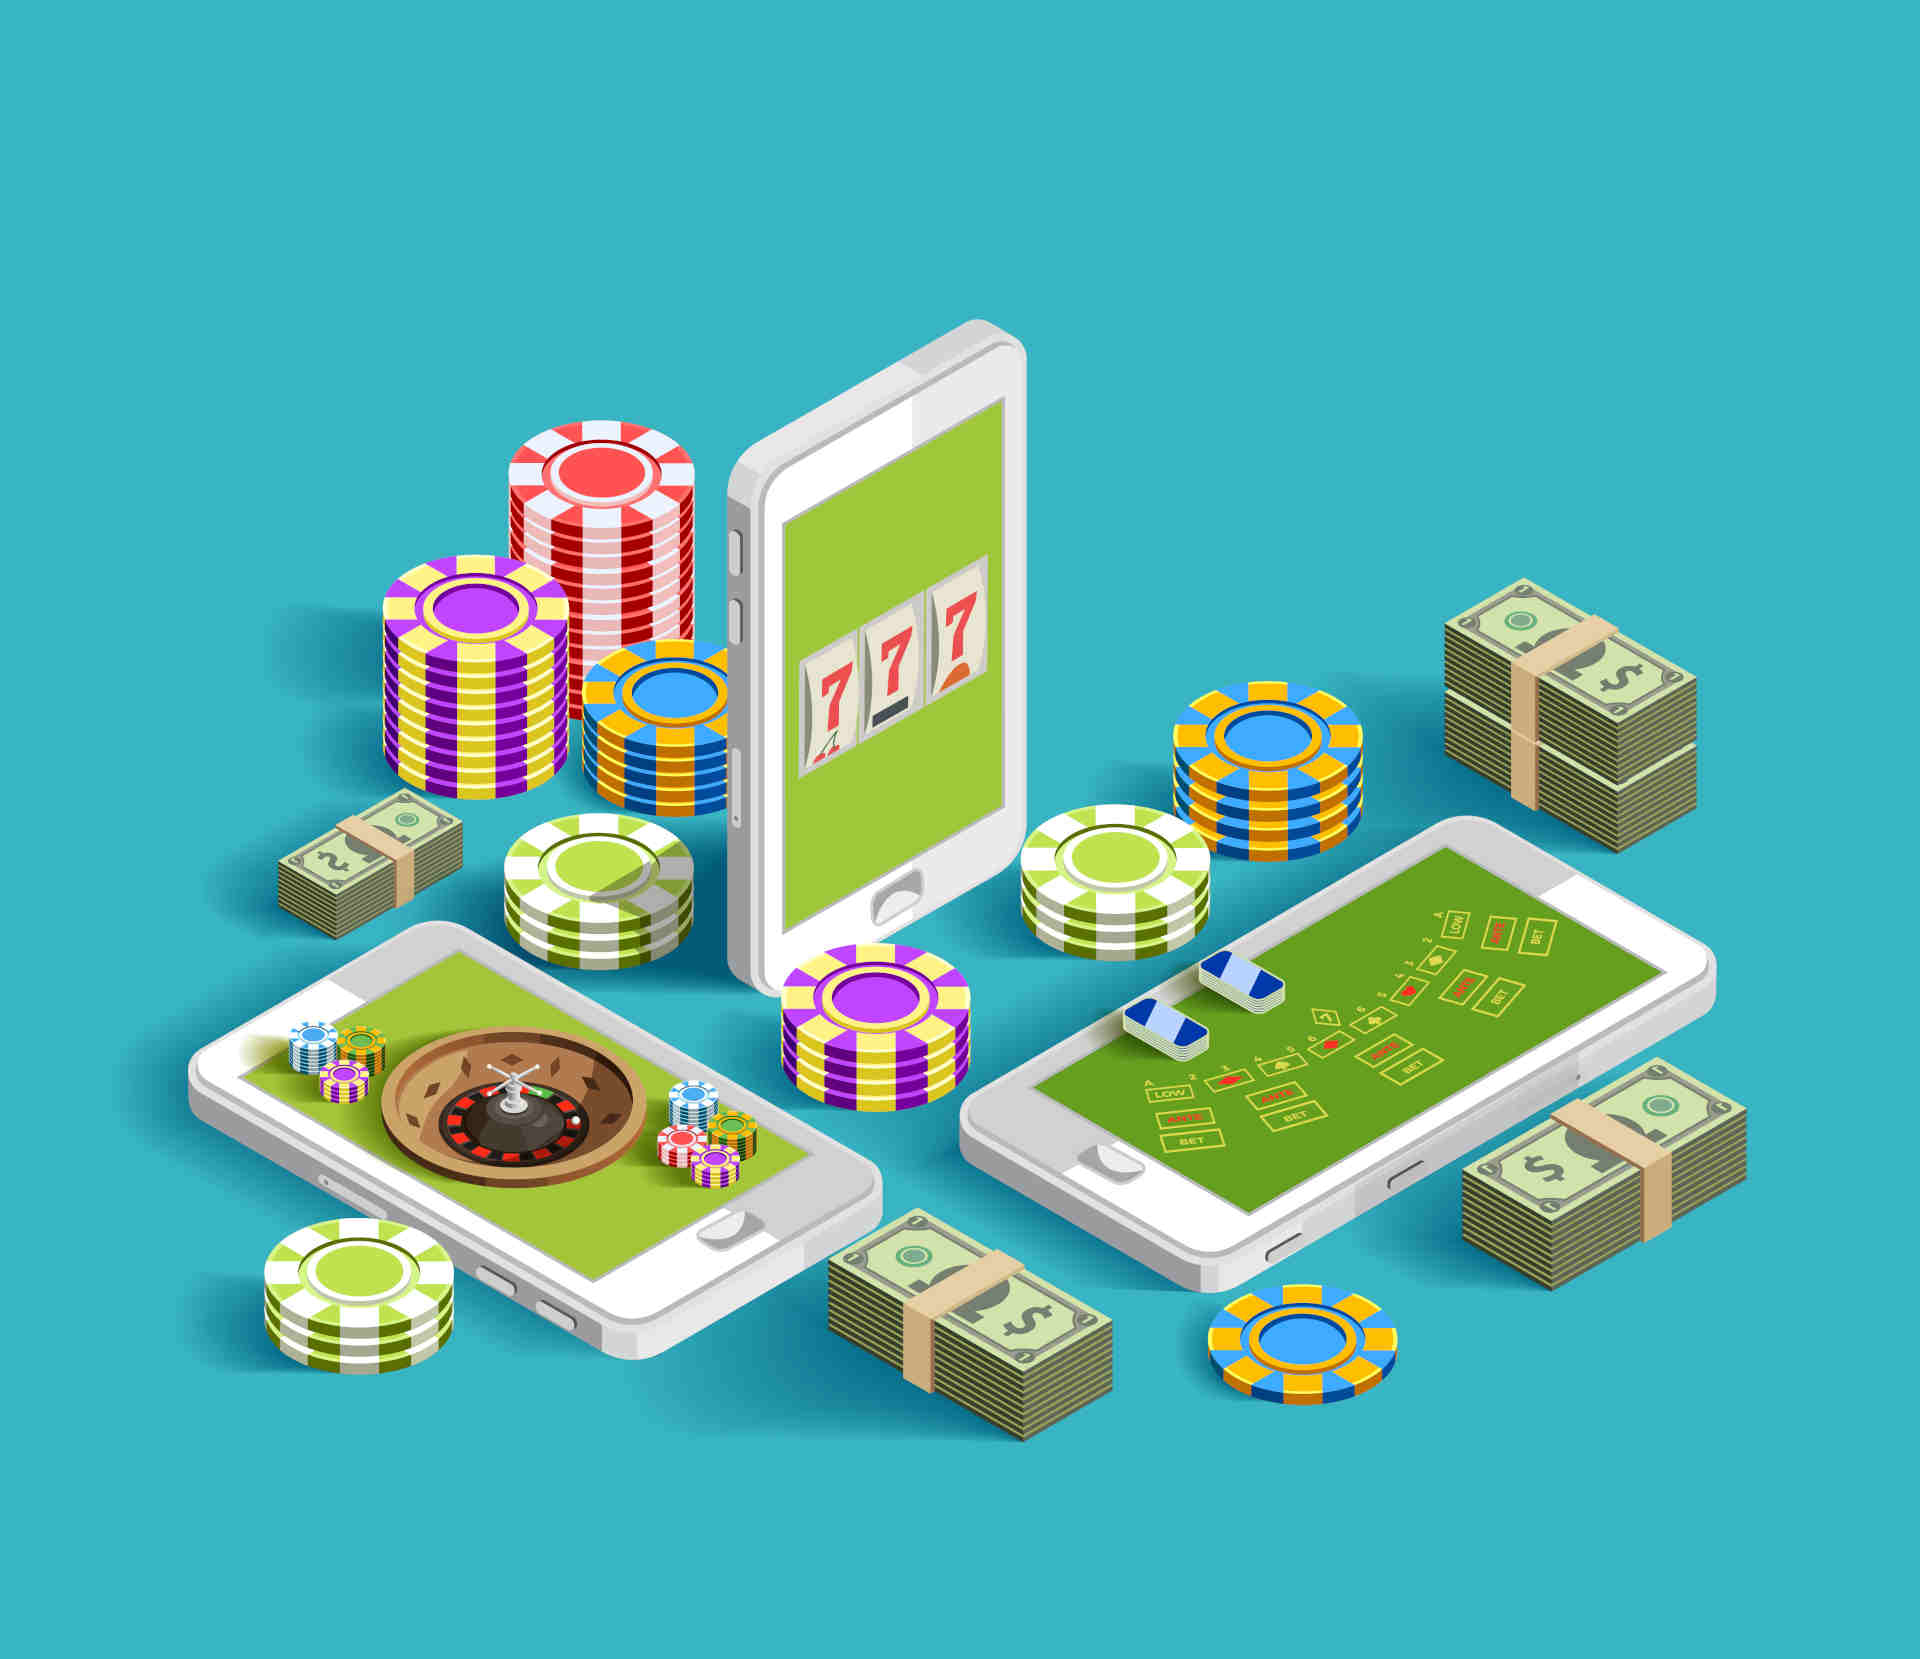 Casino isometric icons composition with chips bundles of banknotes and smartphone images with casino gaming apps vector illustration